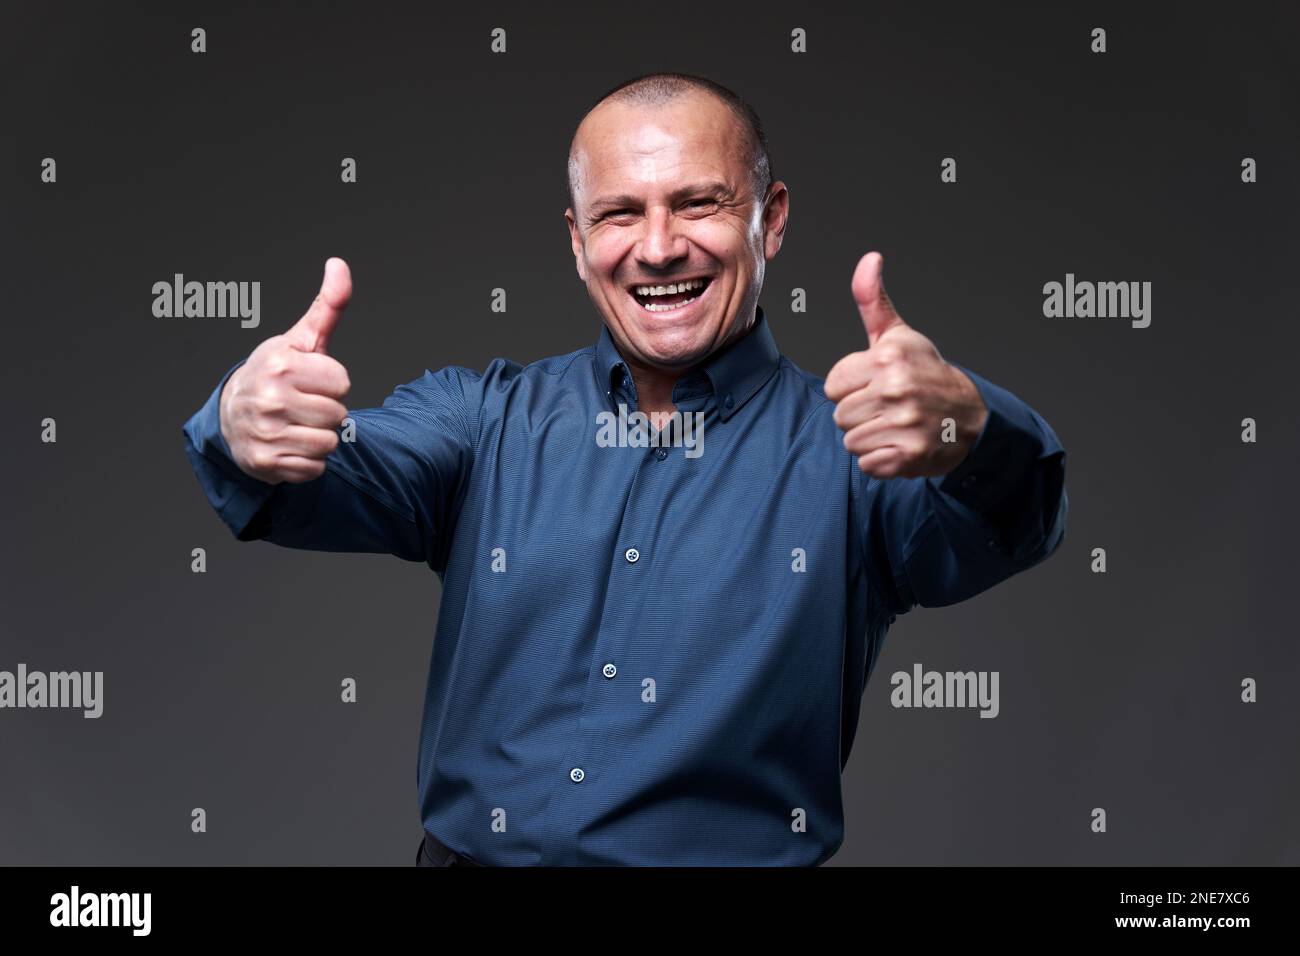 Happy businessman showing thumbs up sign, at the end of a done deal, isolated on gray background Stock Photo